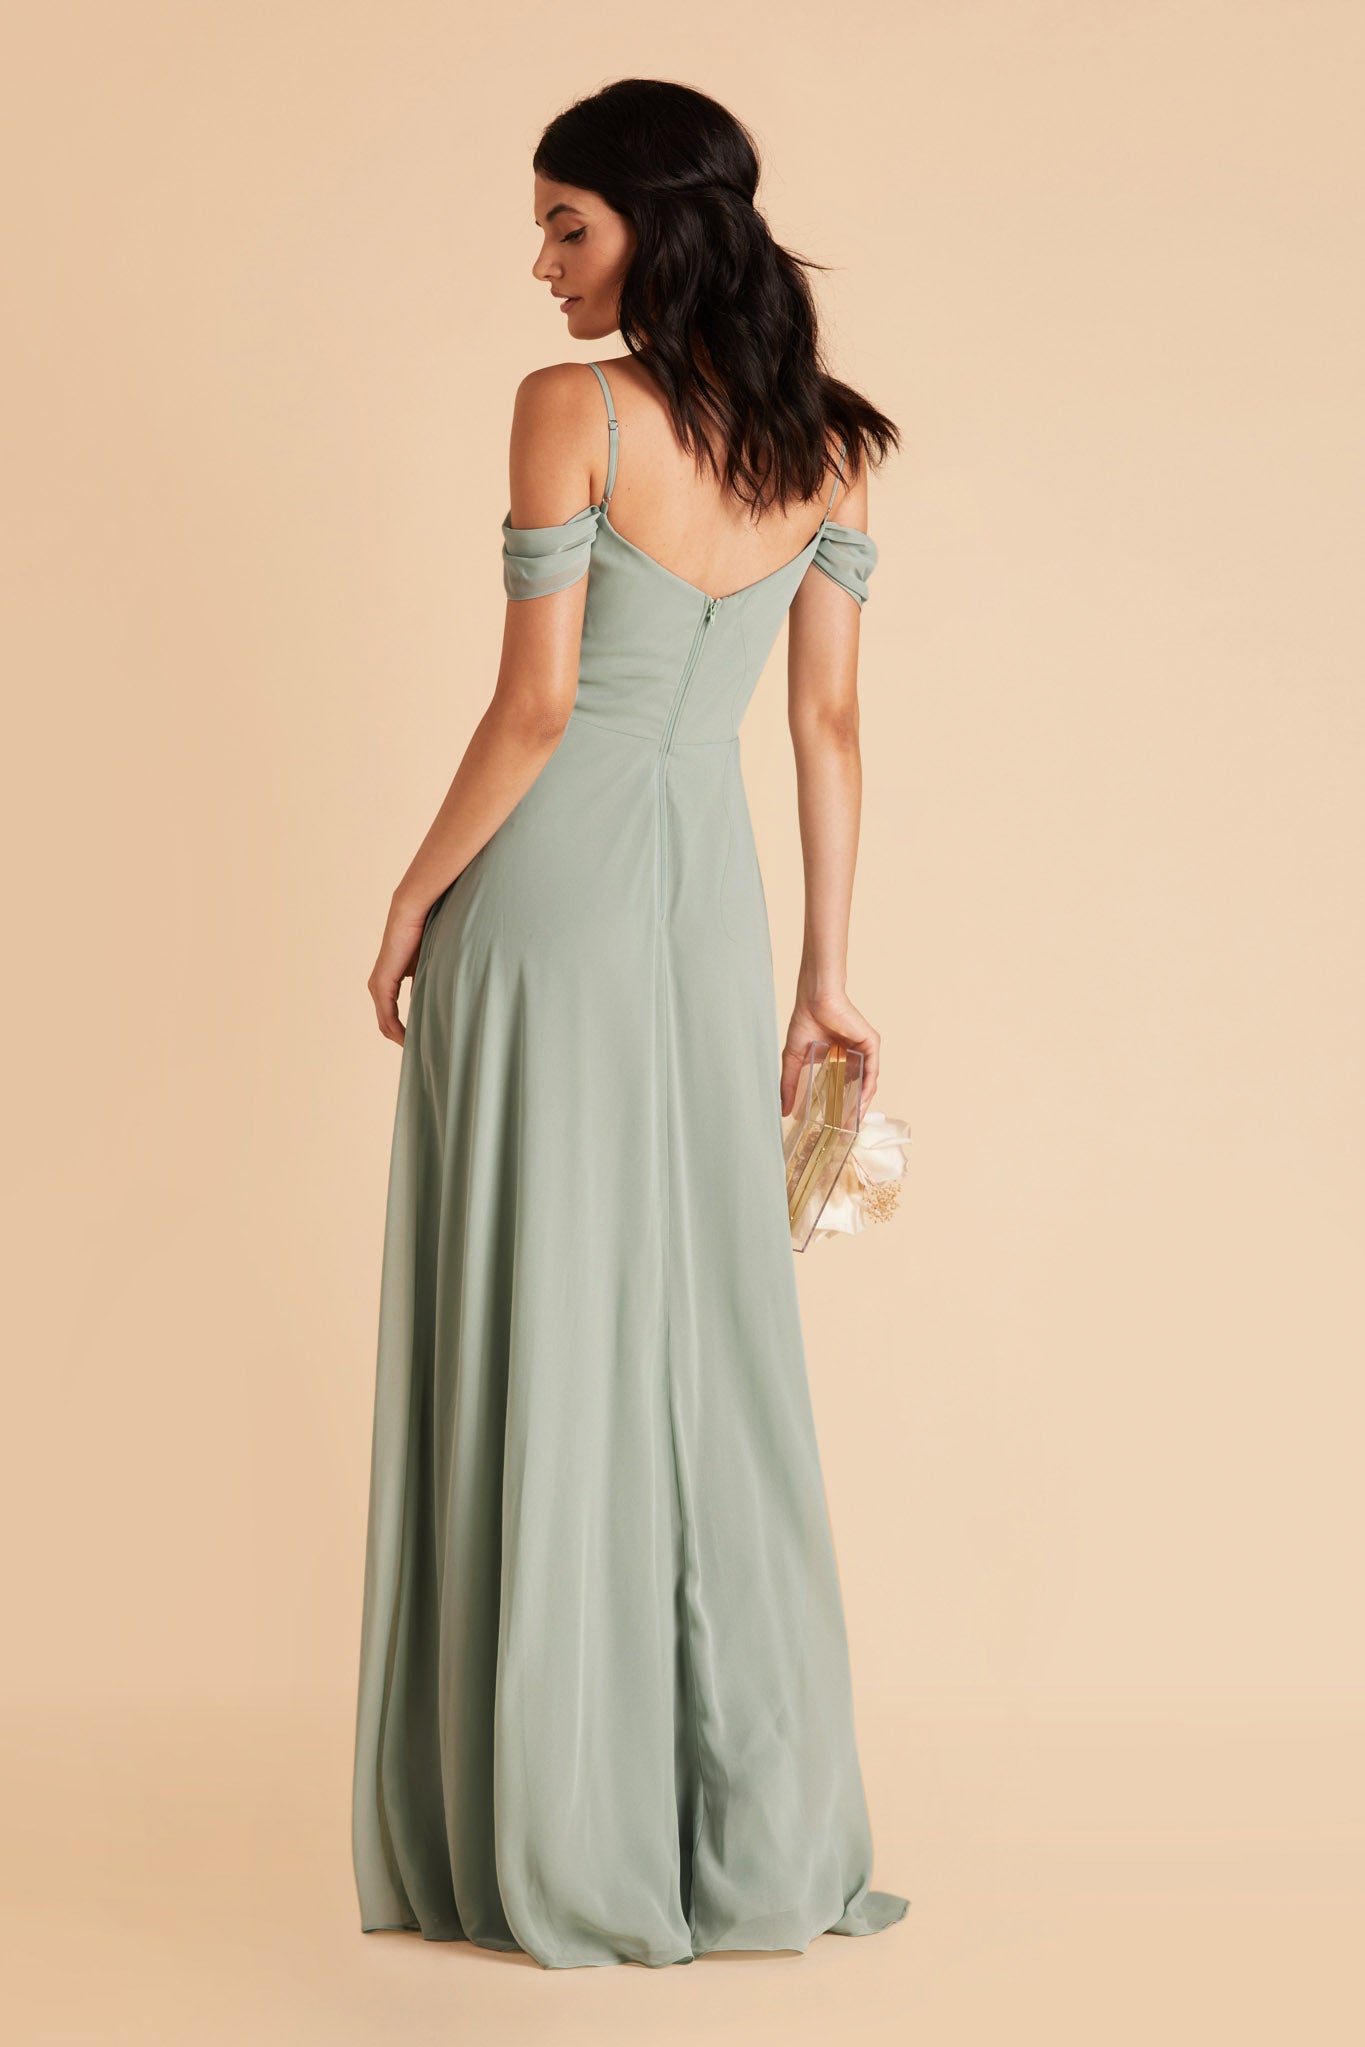 Back view of the floor-length Devin Convertible Bridesmaid Dress in sage chiffon displays adjustable spaghetti straps and draping sleeves over the upper arms.